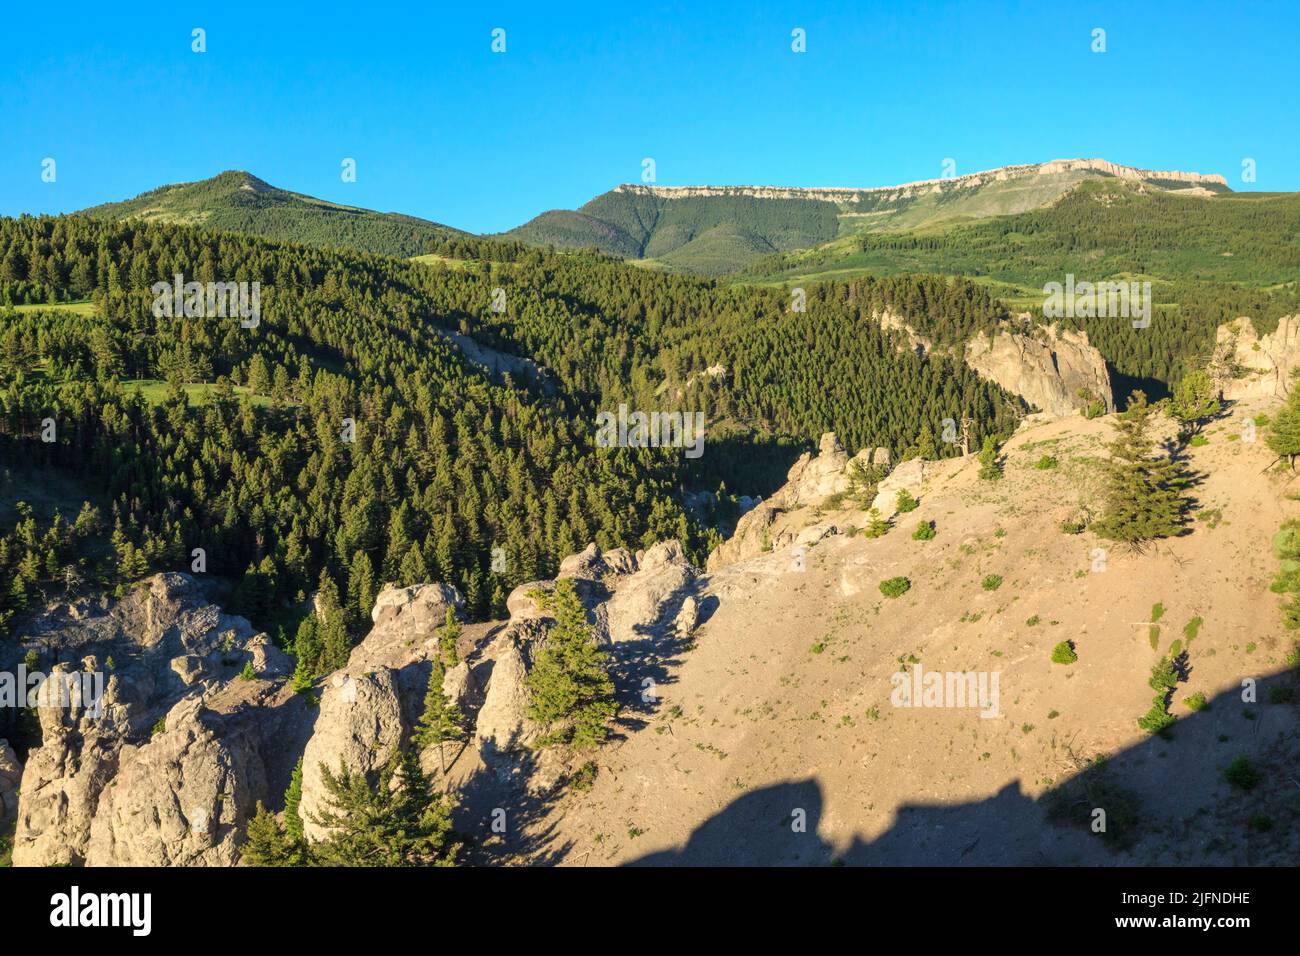 cliffs below table mountain in lewis and clark national forest near augusta, montana Stock Photo